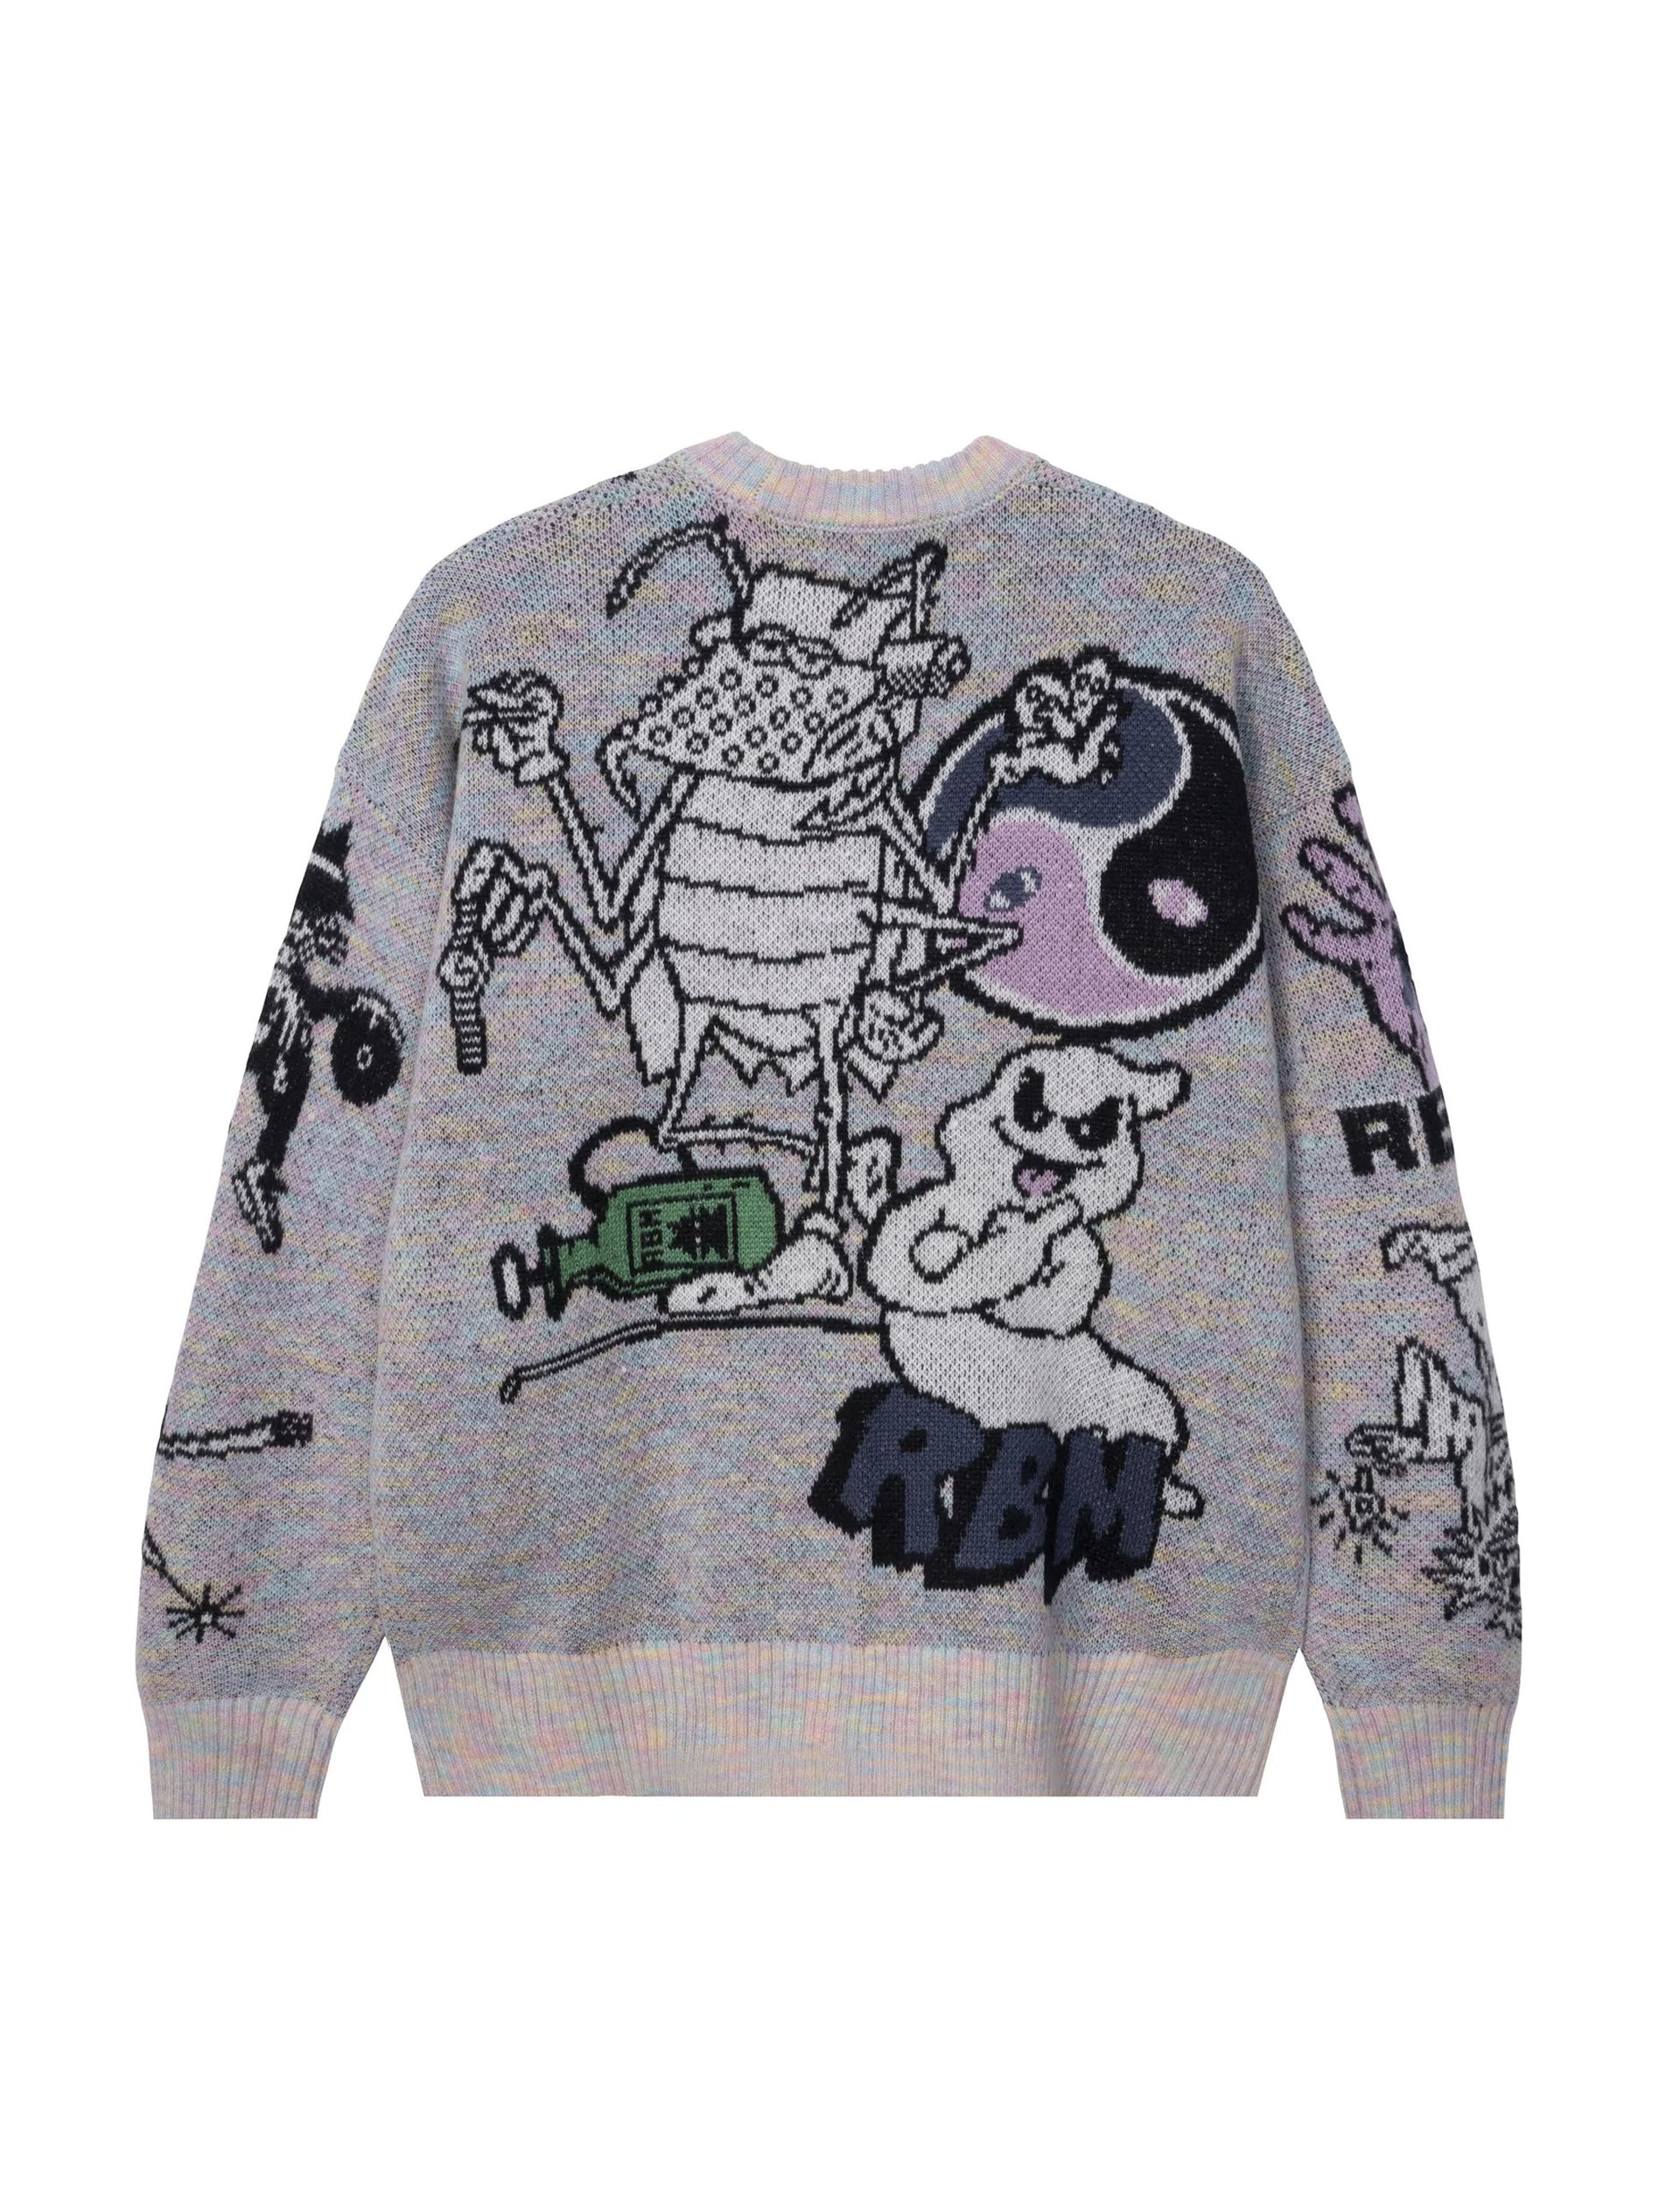 REAL BAD MAN TOO MANY GRAPHICS SWEATER